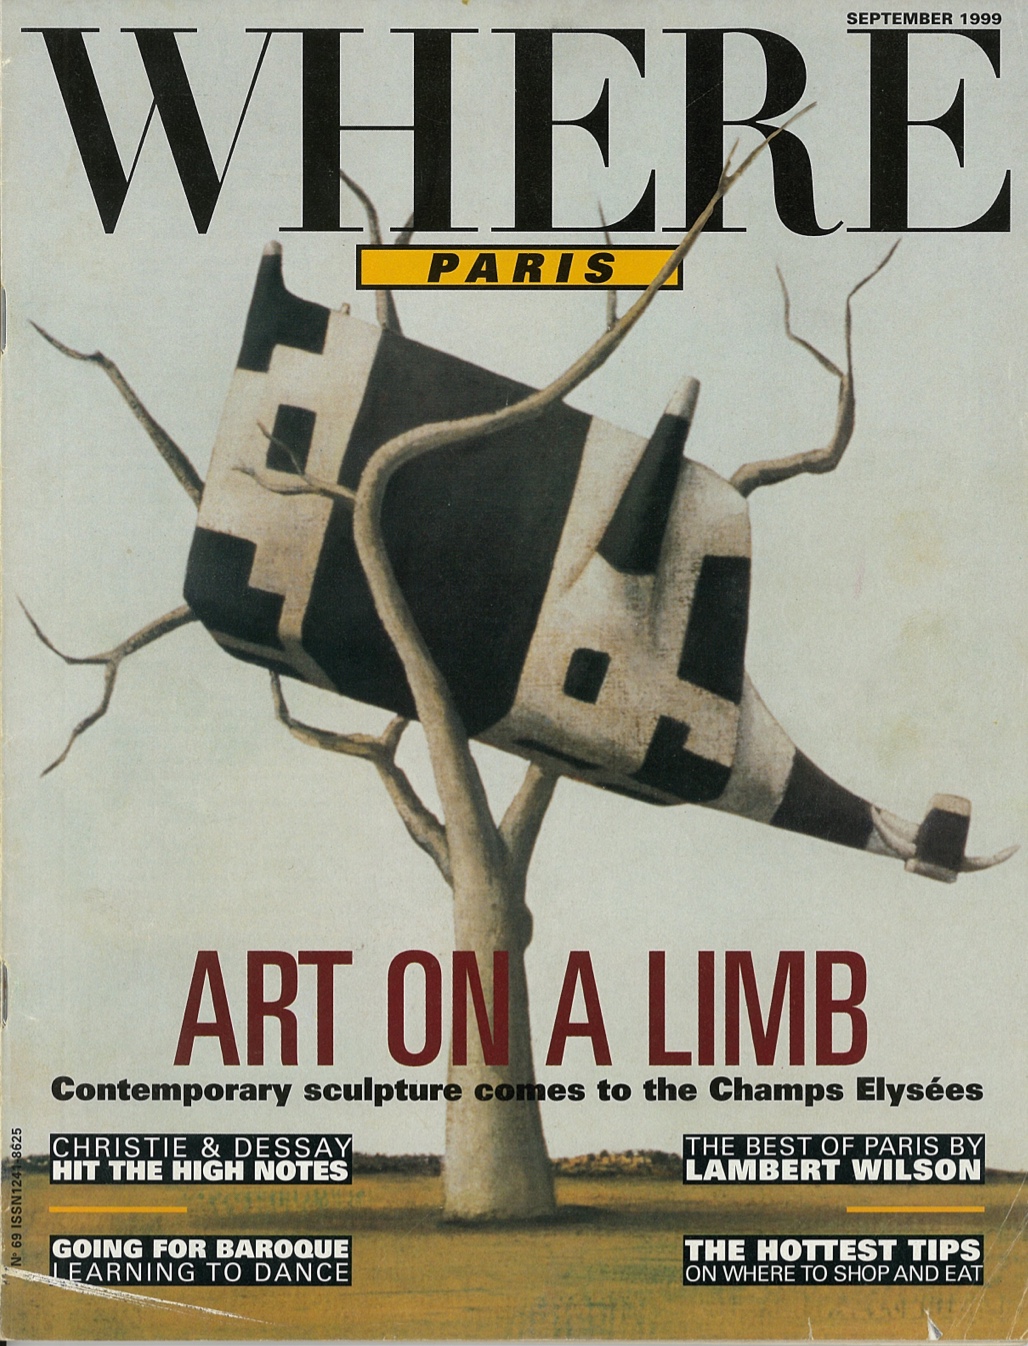 Painted version of ‘Cow up a Tree’ on the cover of Where Paris, September 1999; apart from superimposed text, the entire cover is of one of John Kelly’s ‘Cow up a Tree’ paintings; the main title reads ’Art on a limb: Contemporary sculpture comes to the Champs Elysées’